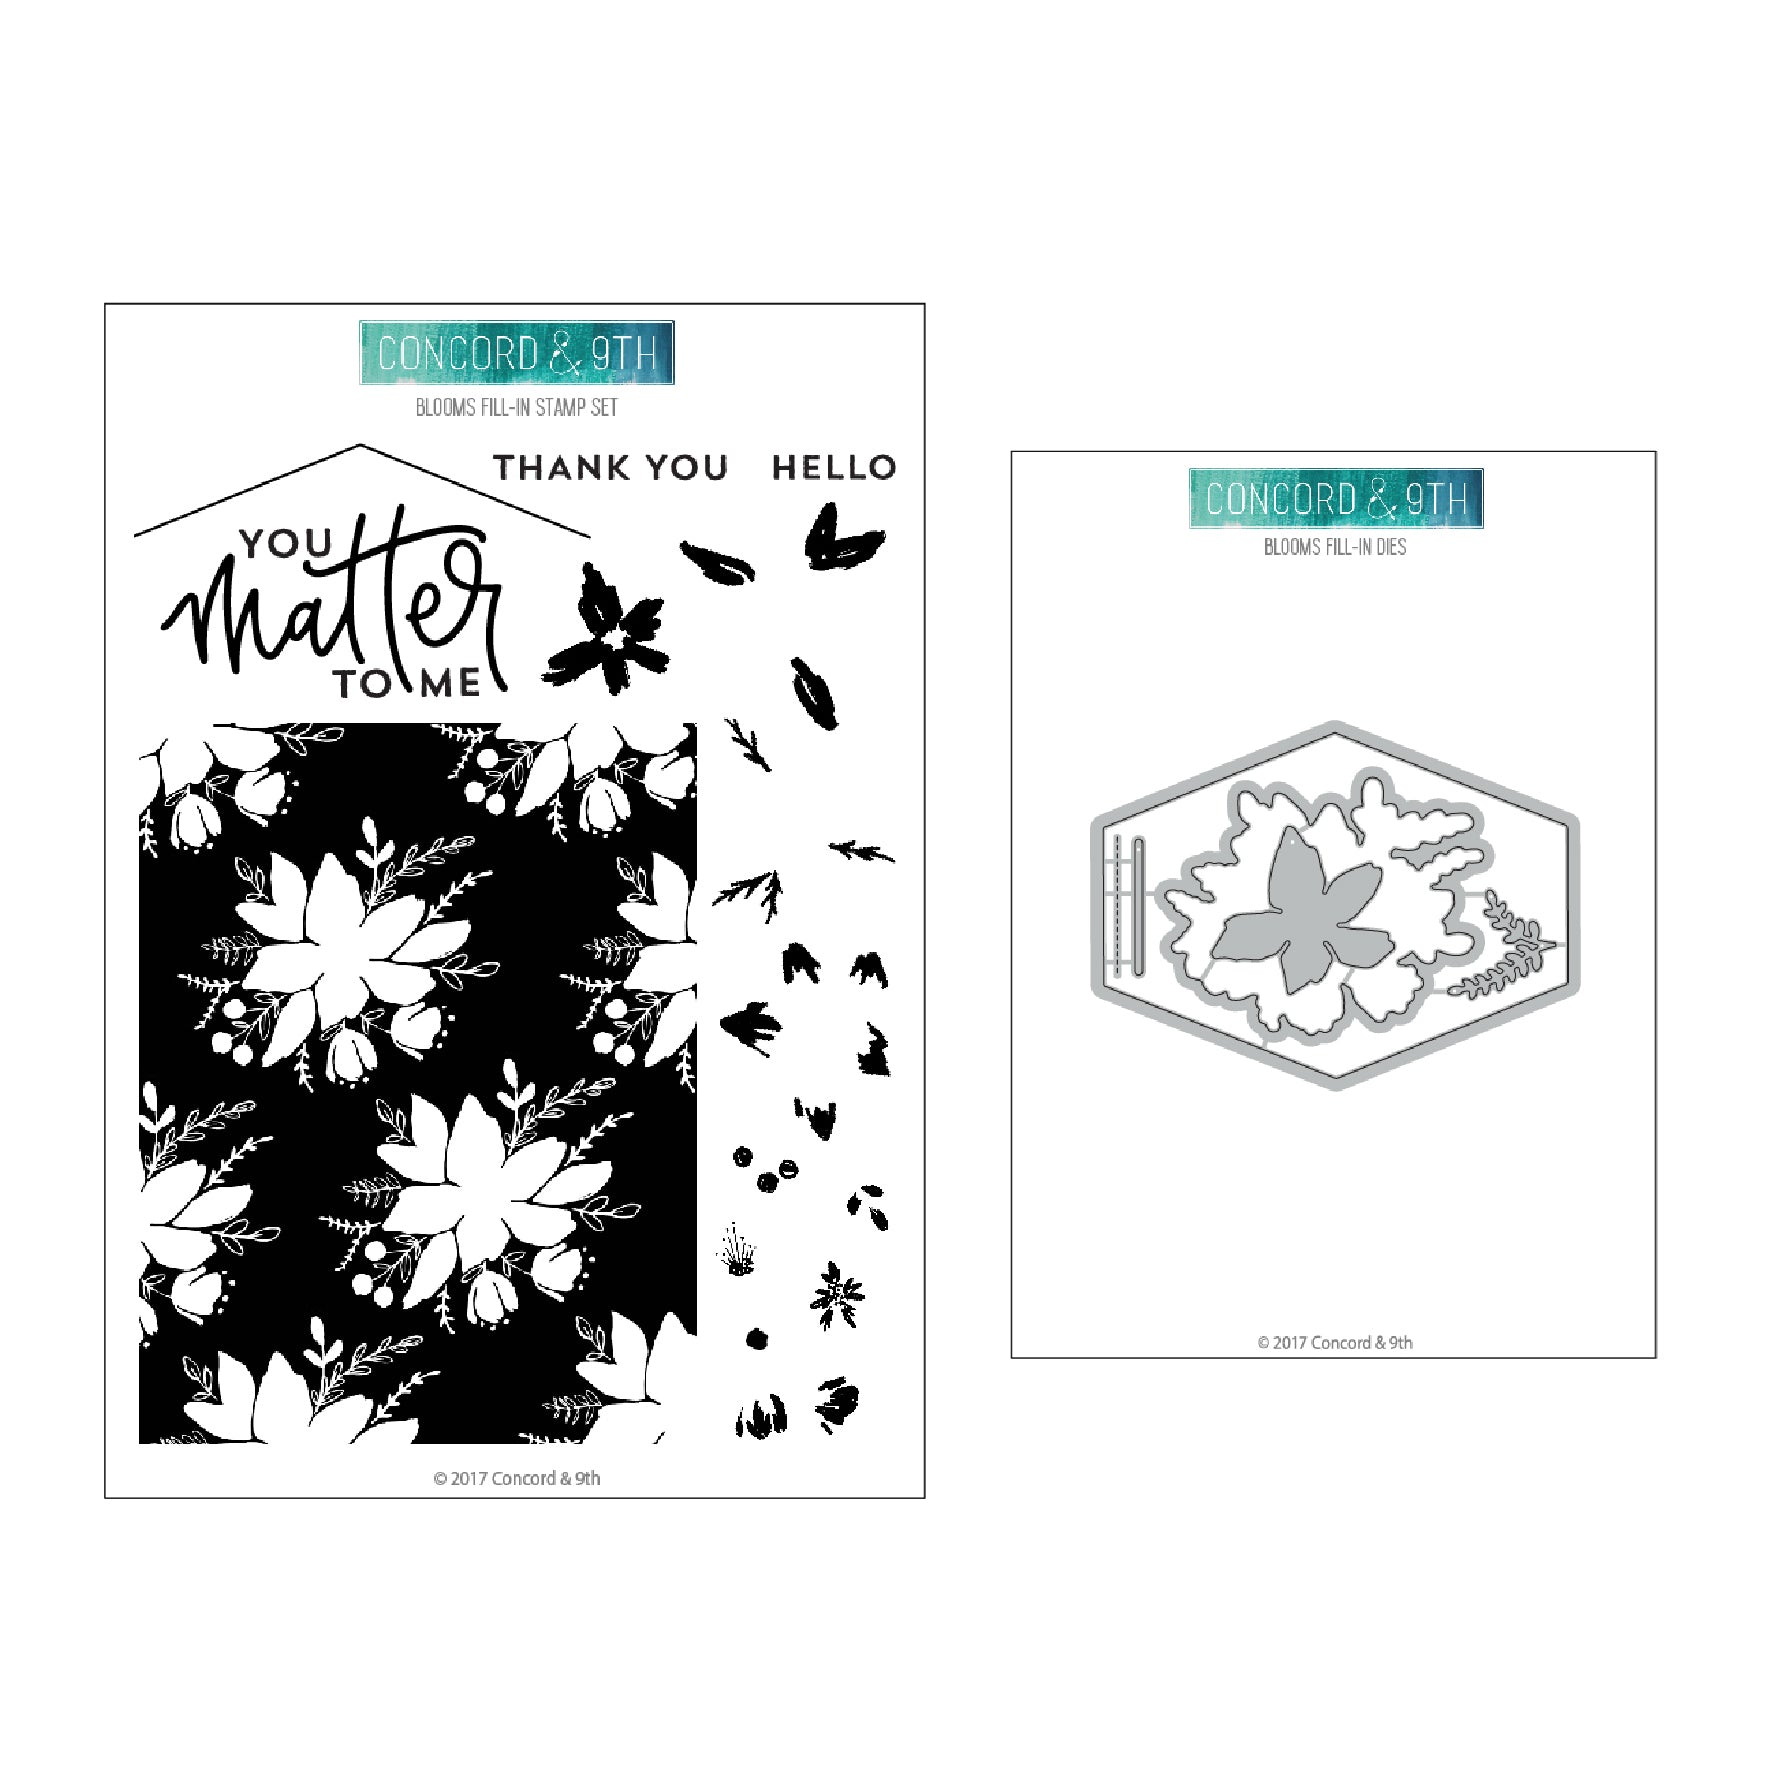 LAST CHANCE: Endless Birthday Stamp Set - Concord & 9th